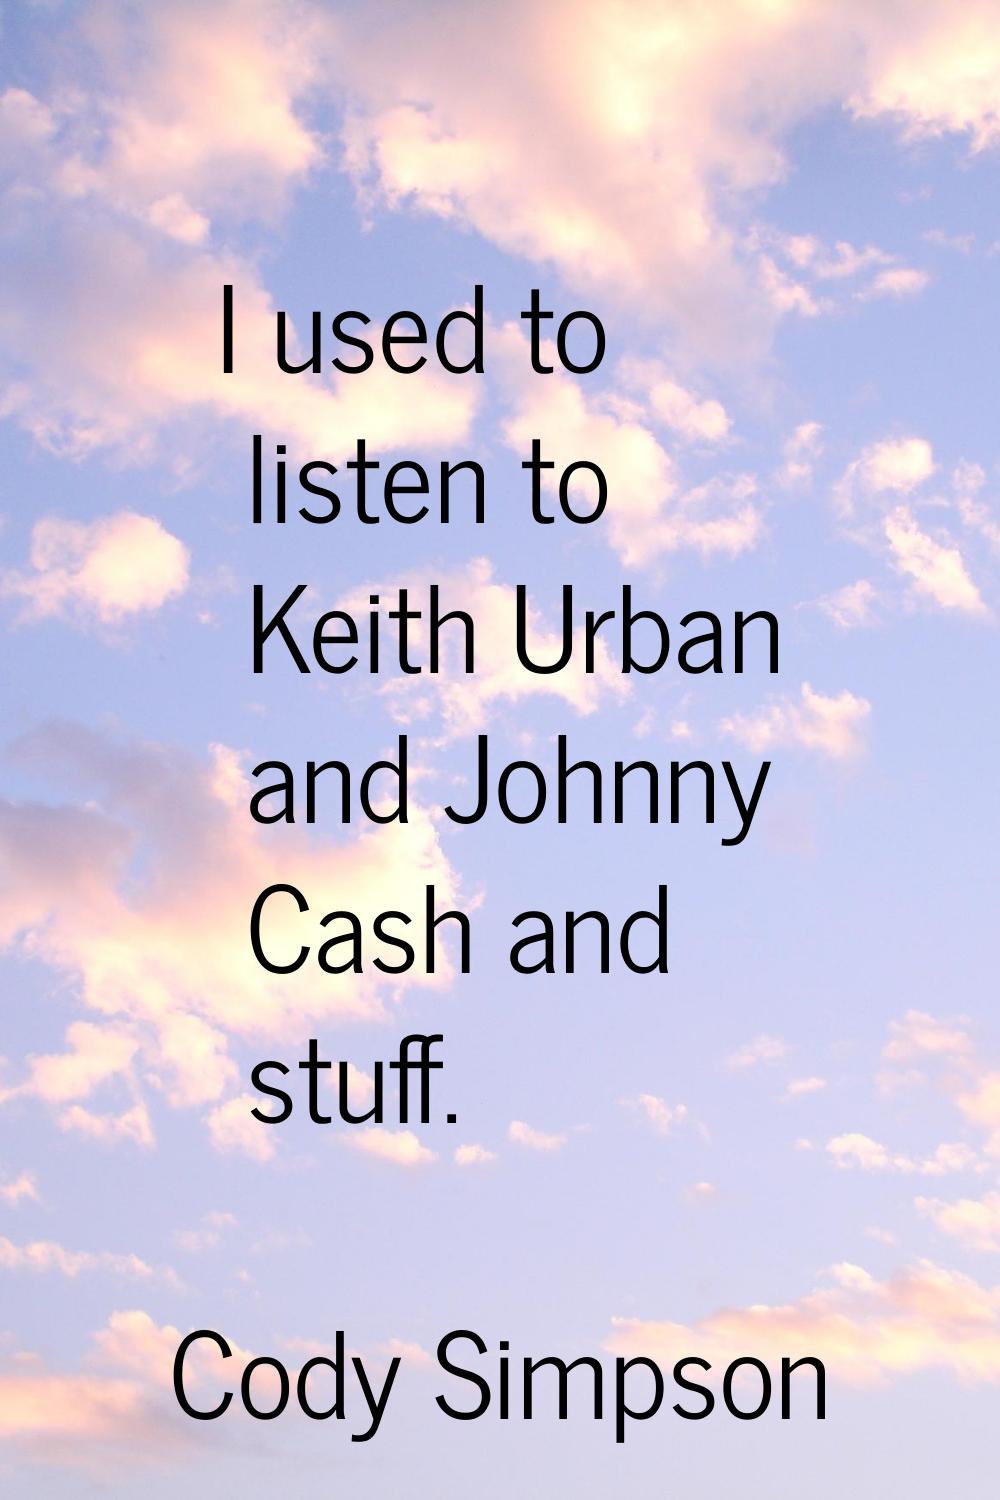 I used to listen to Keith Urban and Johnny Cash and stuff.